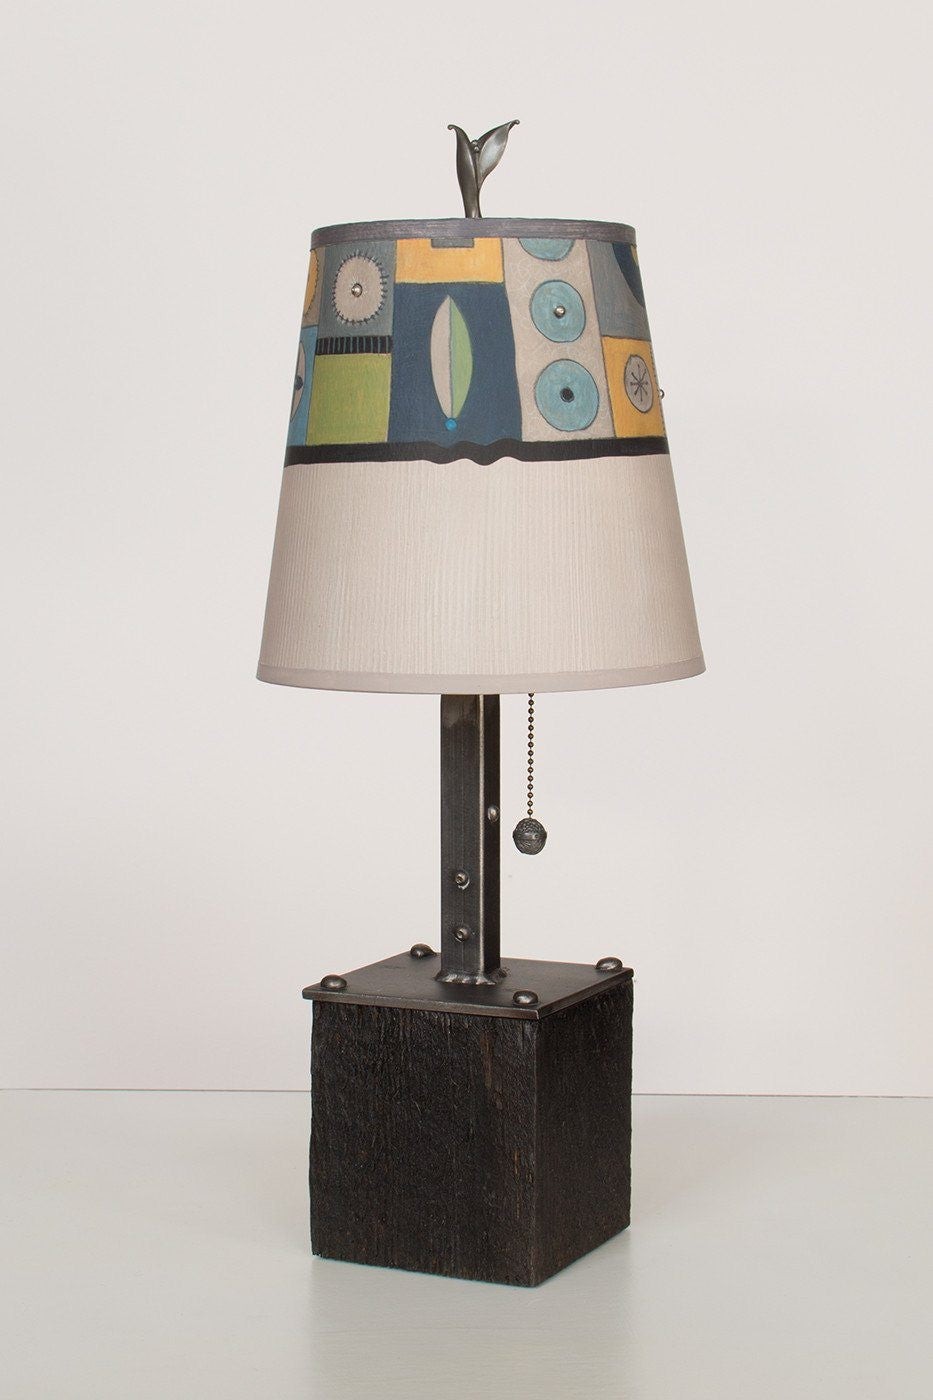 Janna Ugone &amp; Co Table Lamps Steel Table Lamp on Reclaimed Wood with Small Drum Shade in Lucky Mosaic Oyster